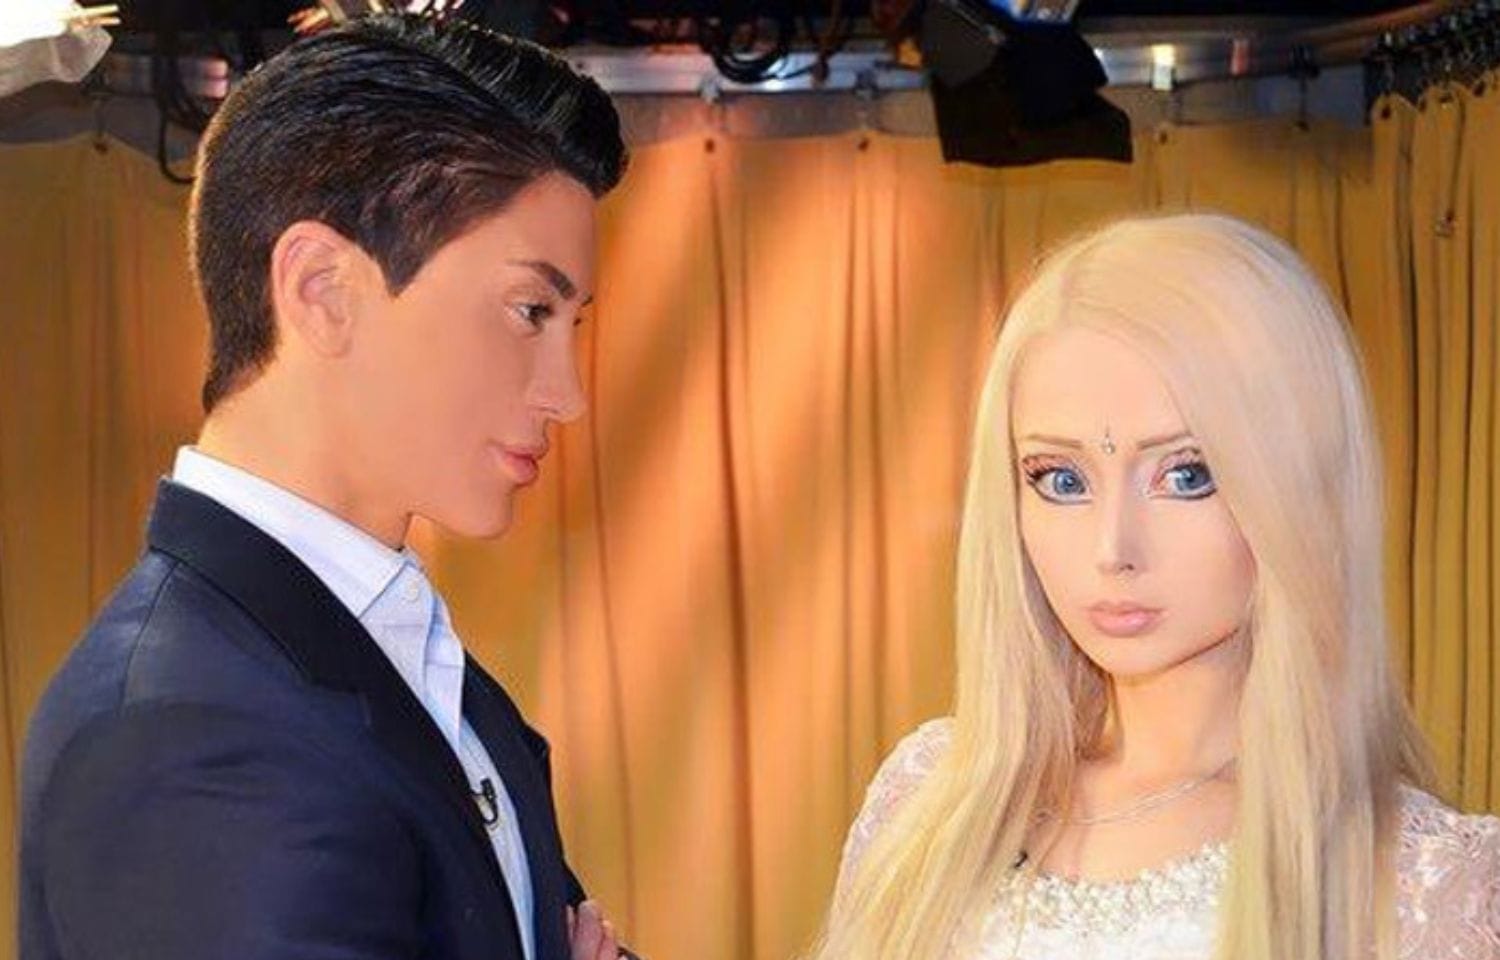 The Bizarre Story Behind The Real-Life Barbie And Ken